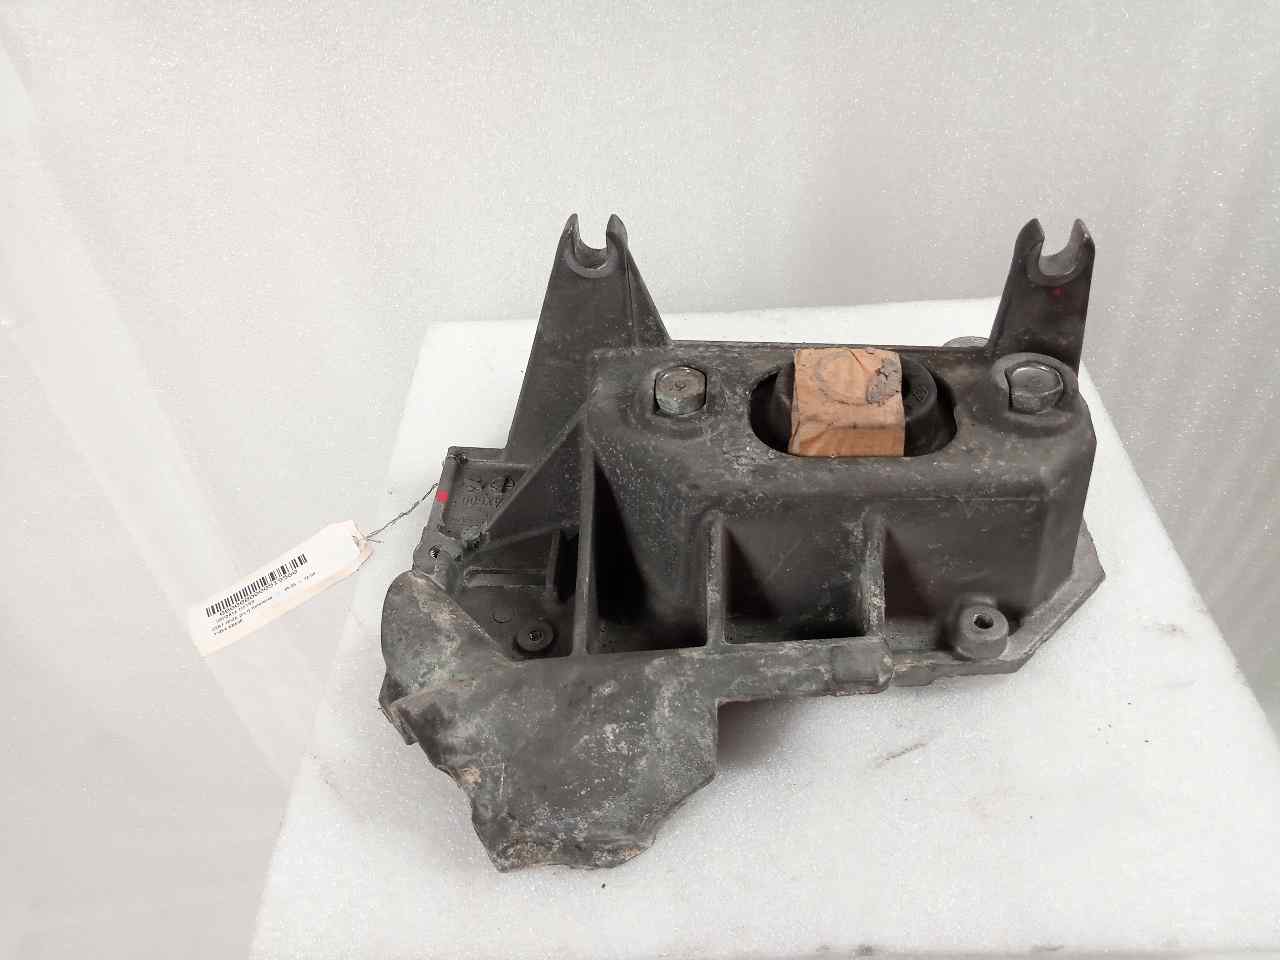 SEAT Ibiza 3 generation (2002-2008) Other Engine Compartment Parts 11254AX600 25316923